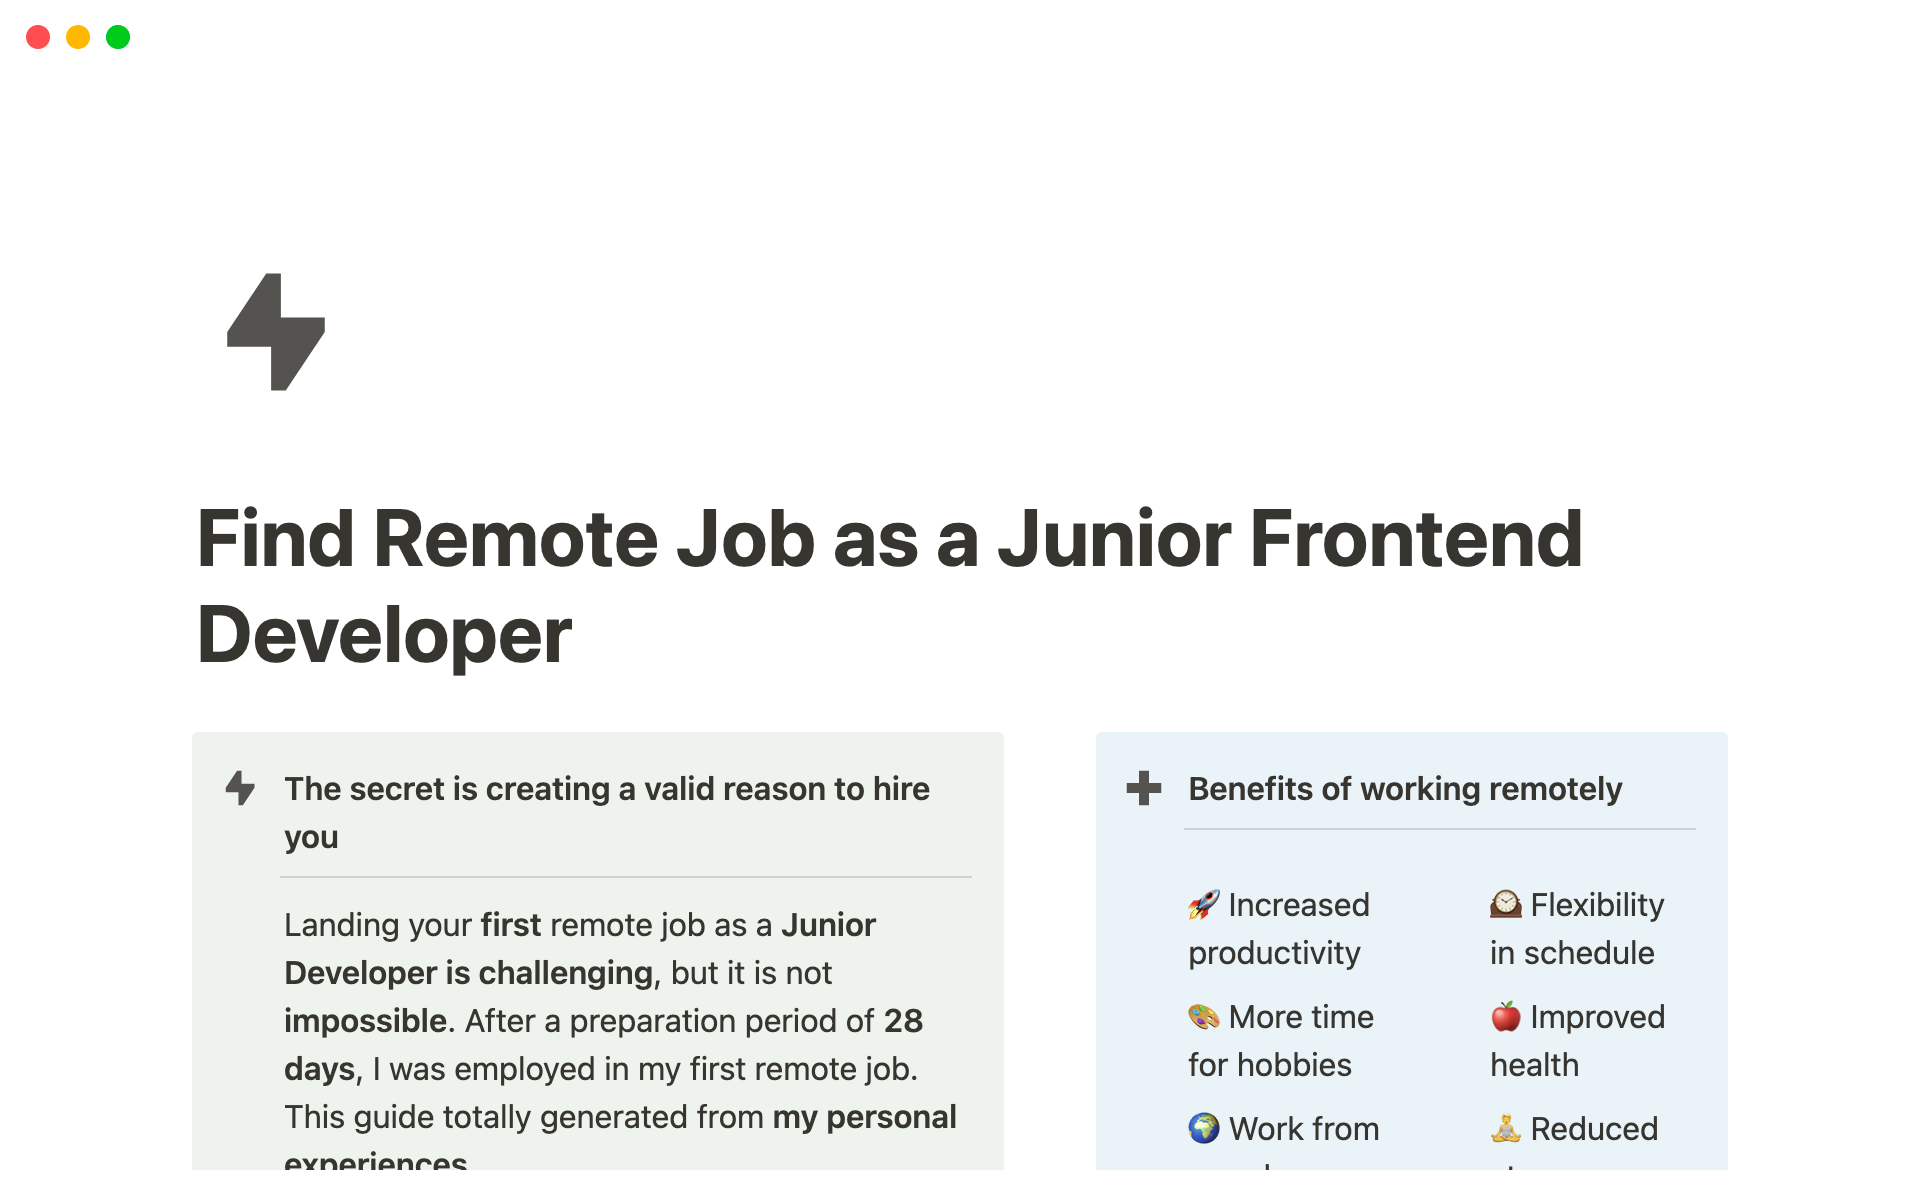 To guide junior frontend developers find their First Remote Job